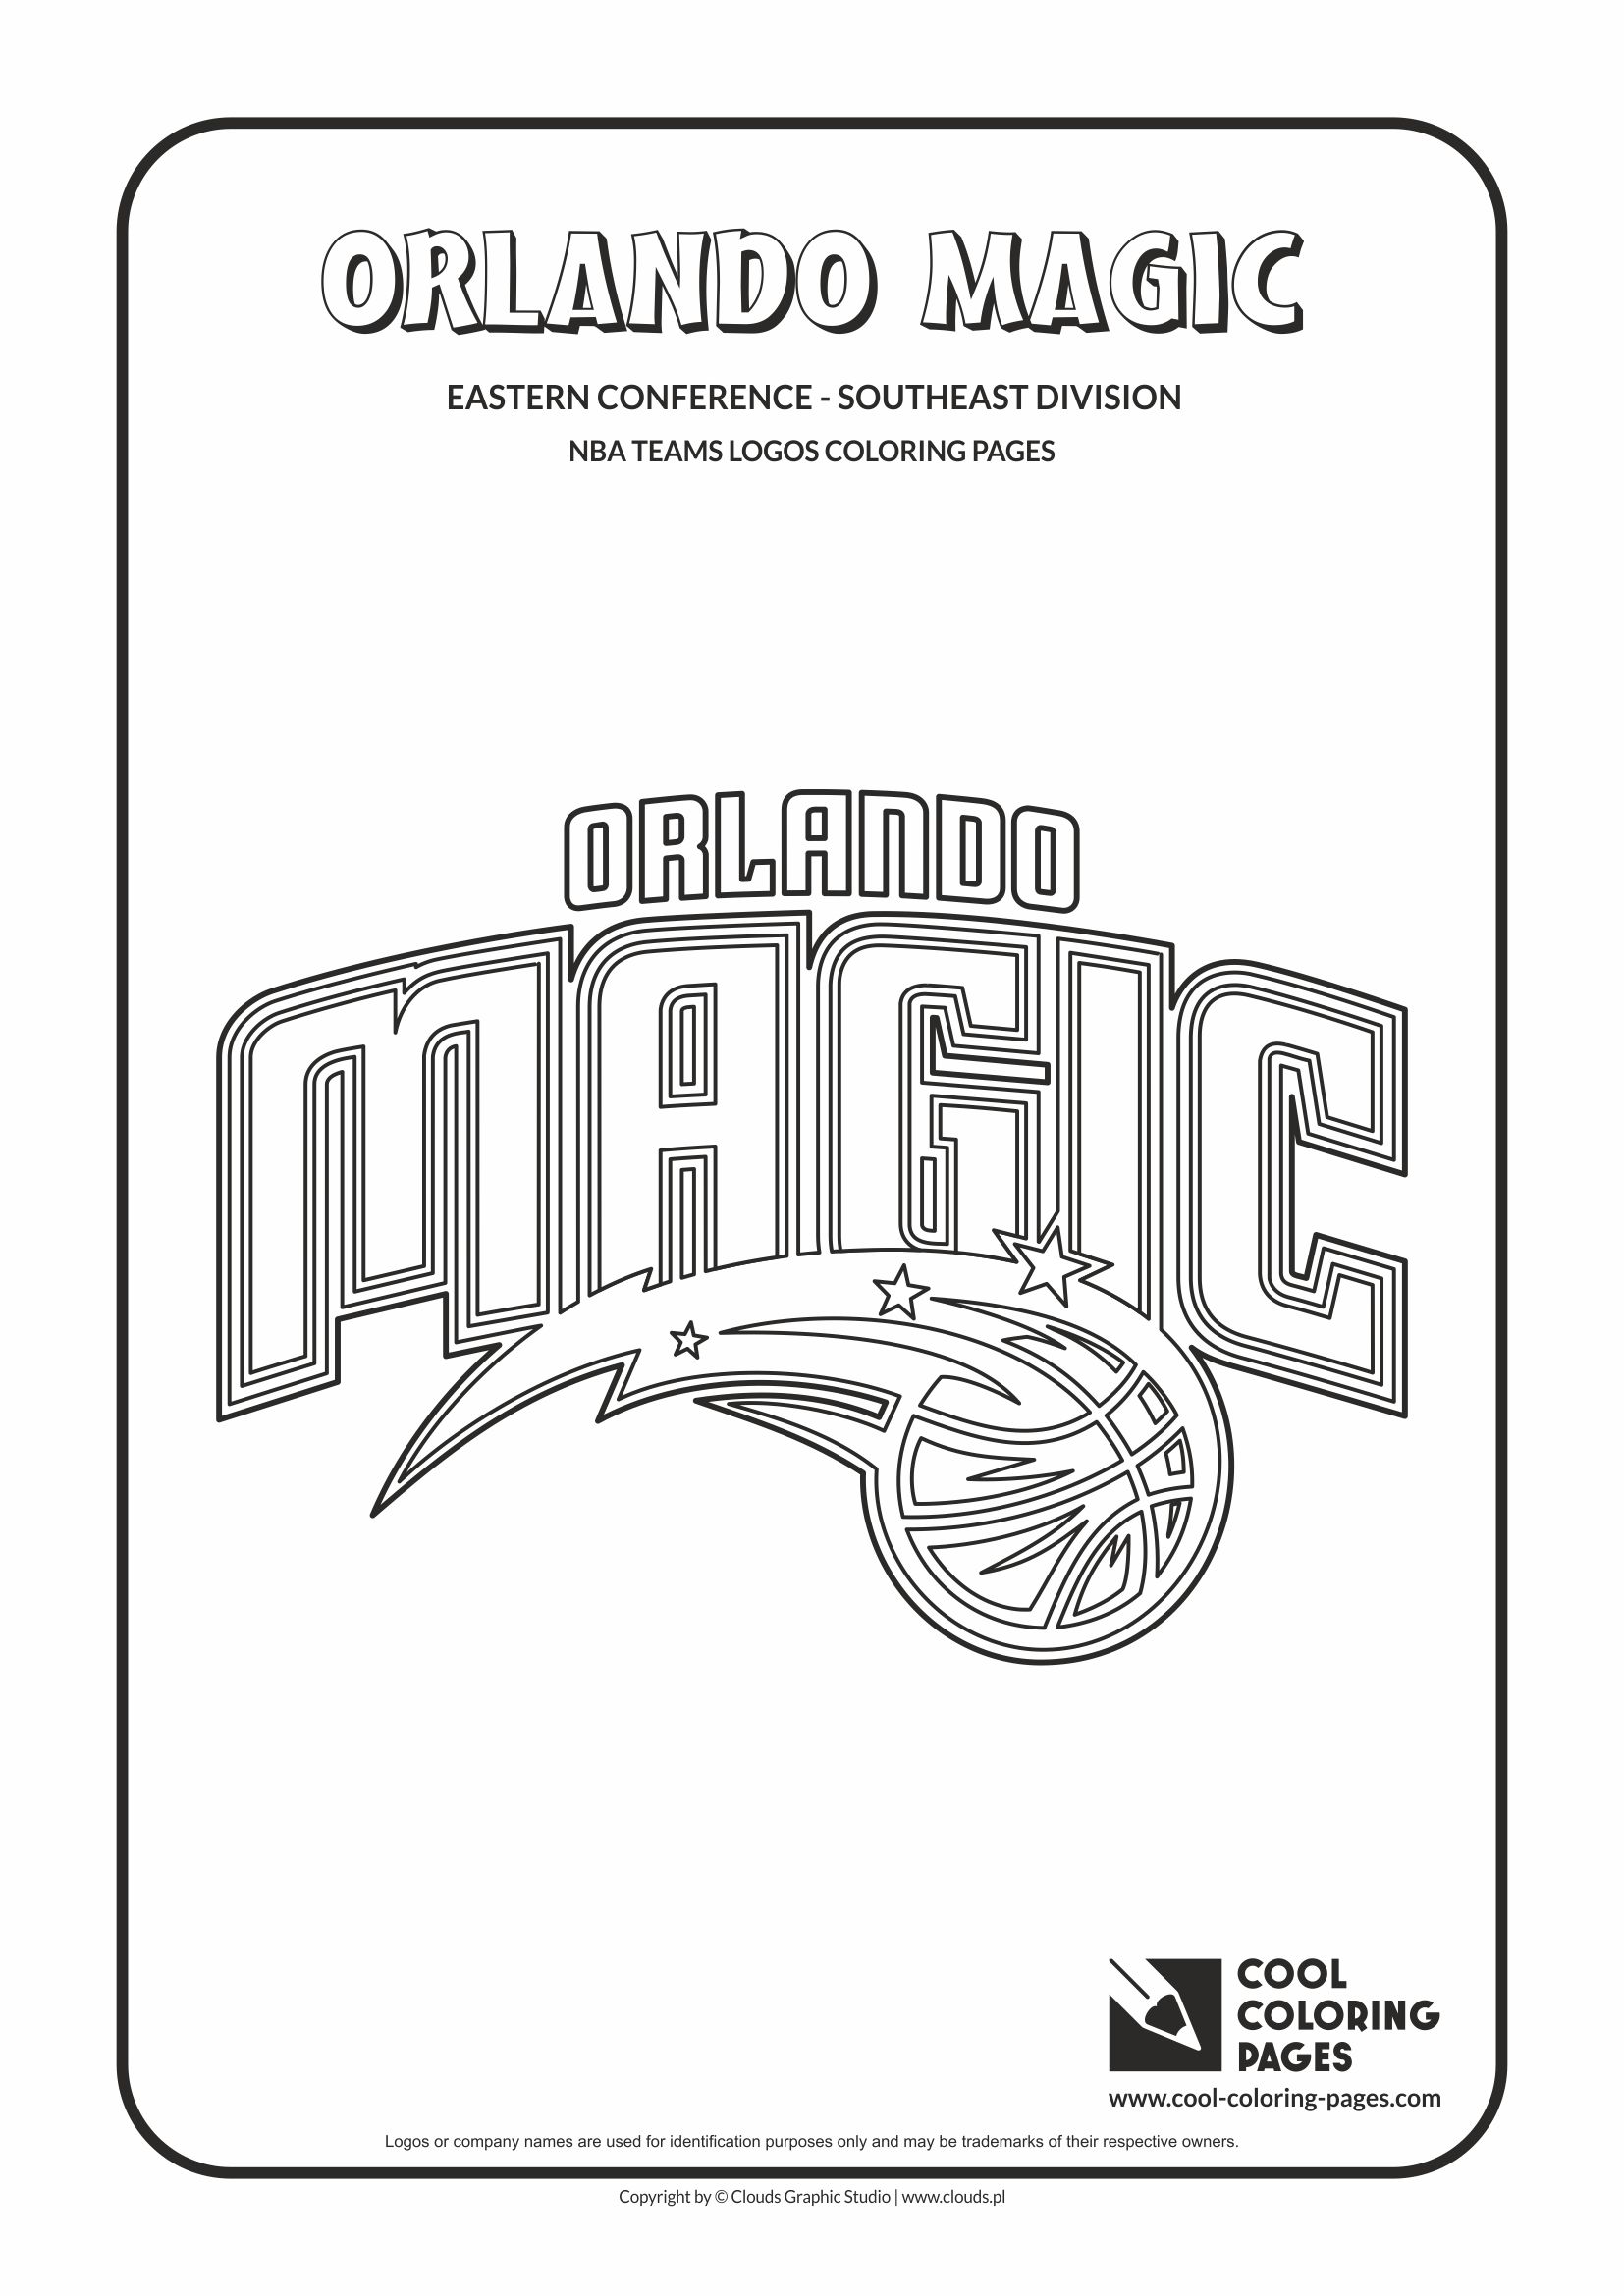 Cool Coloring Pages - NBA Basketball Clubs Logos - Easter Conference - Southeast Division / Orlando Magic logo / Coloring page with Orlando Magic logo